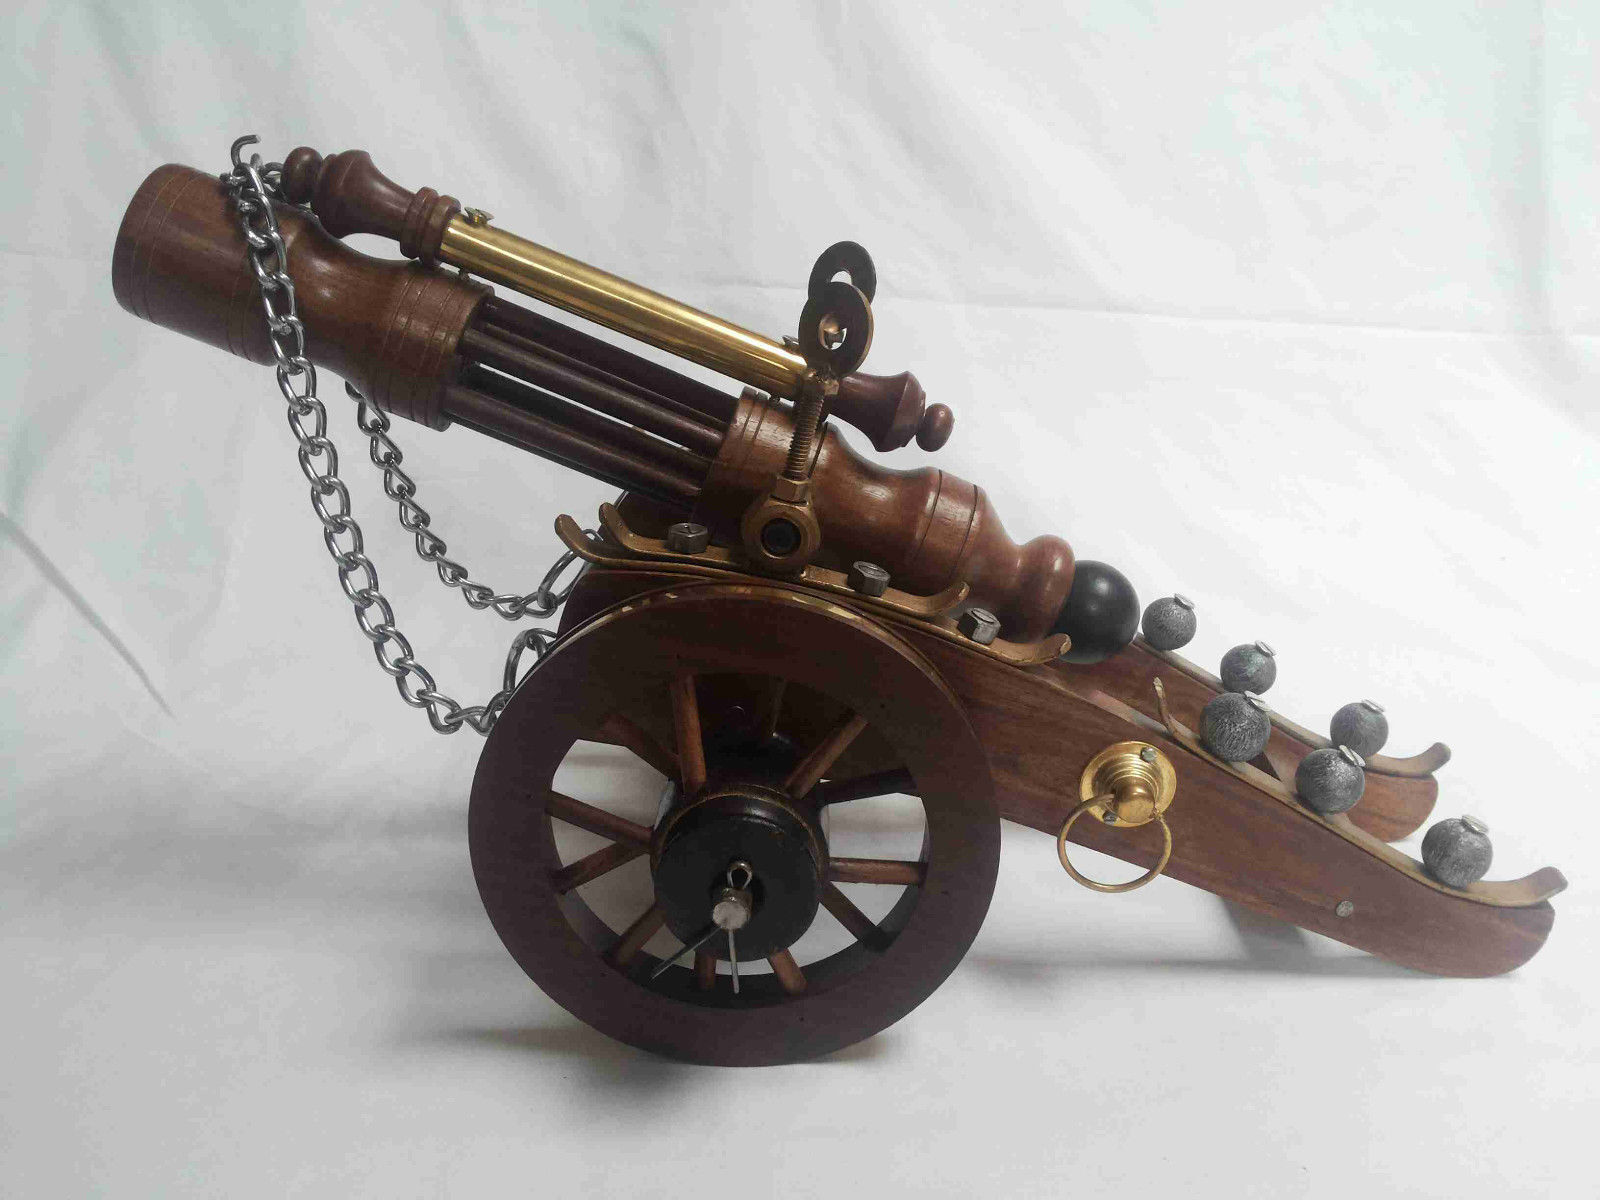 Wood Brass Cannon Vintage Collectible Home Decorative 19 Inch